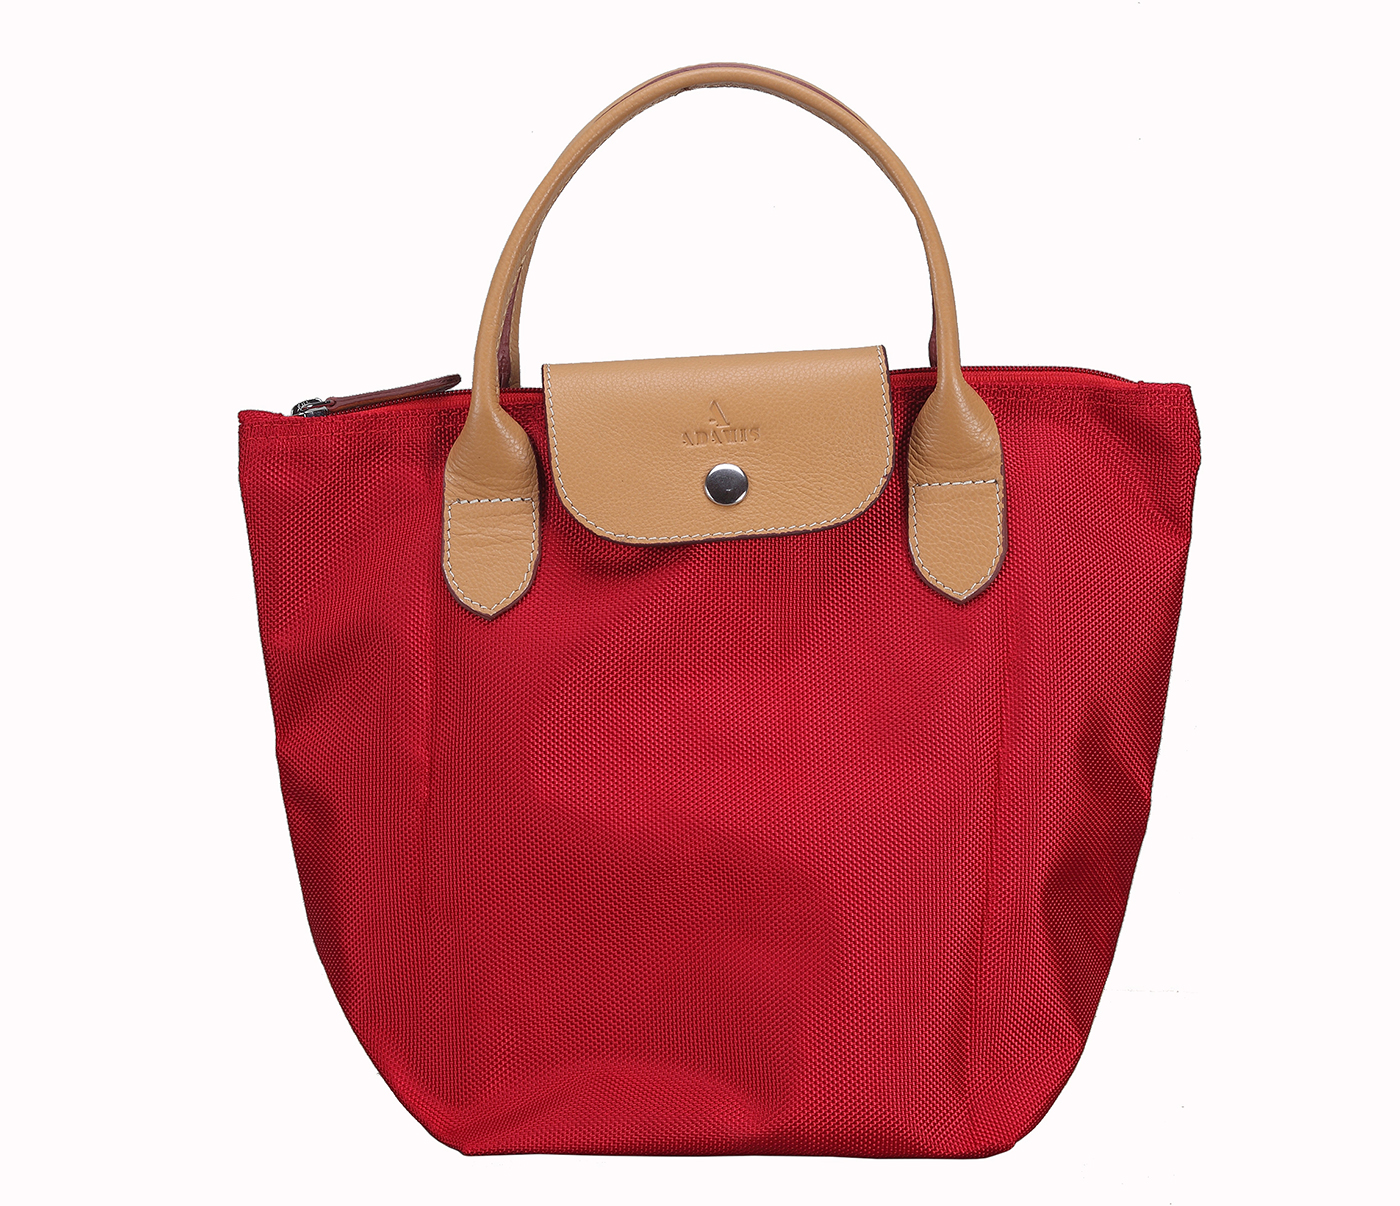 B690-Azul-Folding Tote in Tetron Material with Genuine Leather trimmings - Red